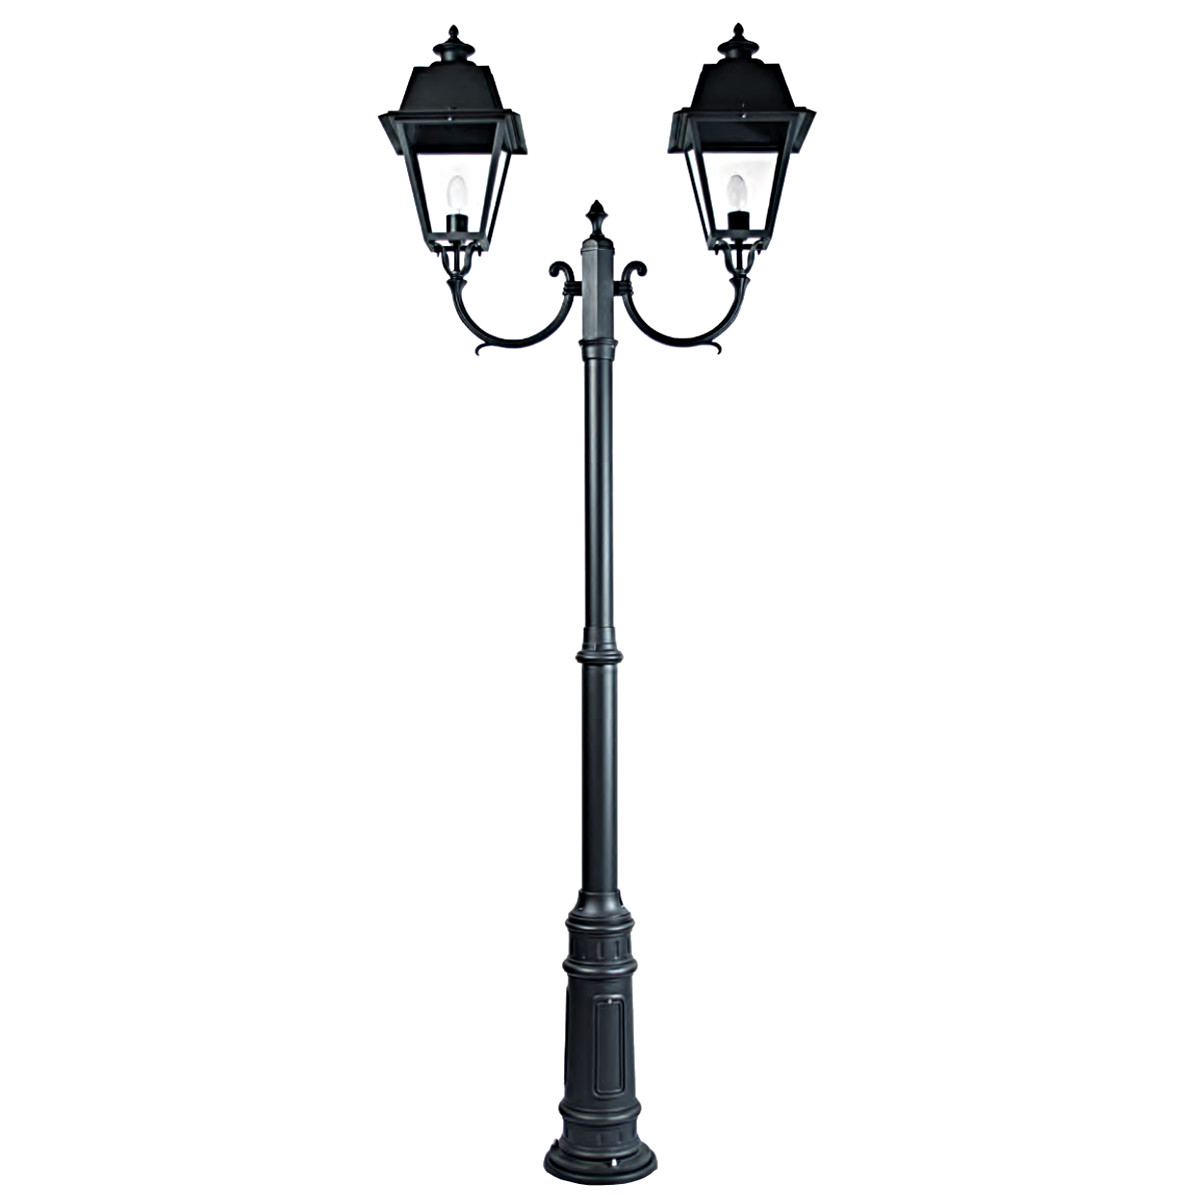 Historical Double-flame Lantern Post Lamp from Italy